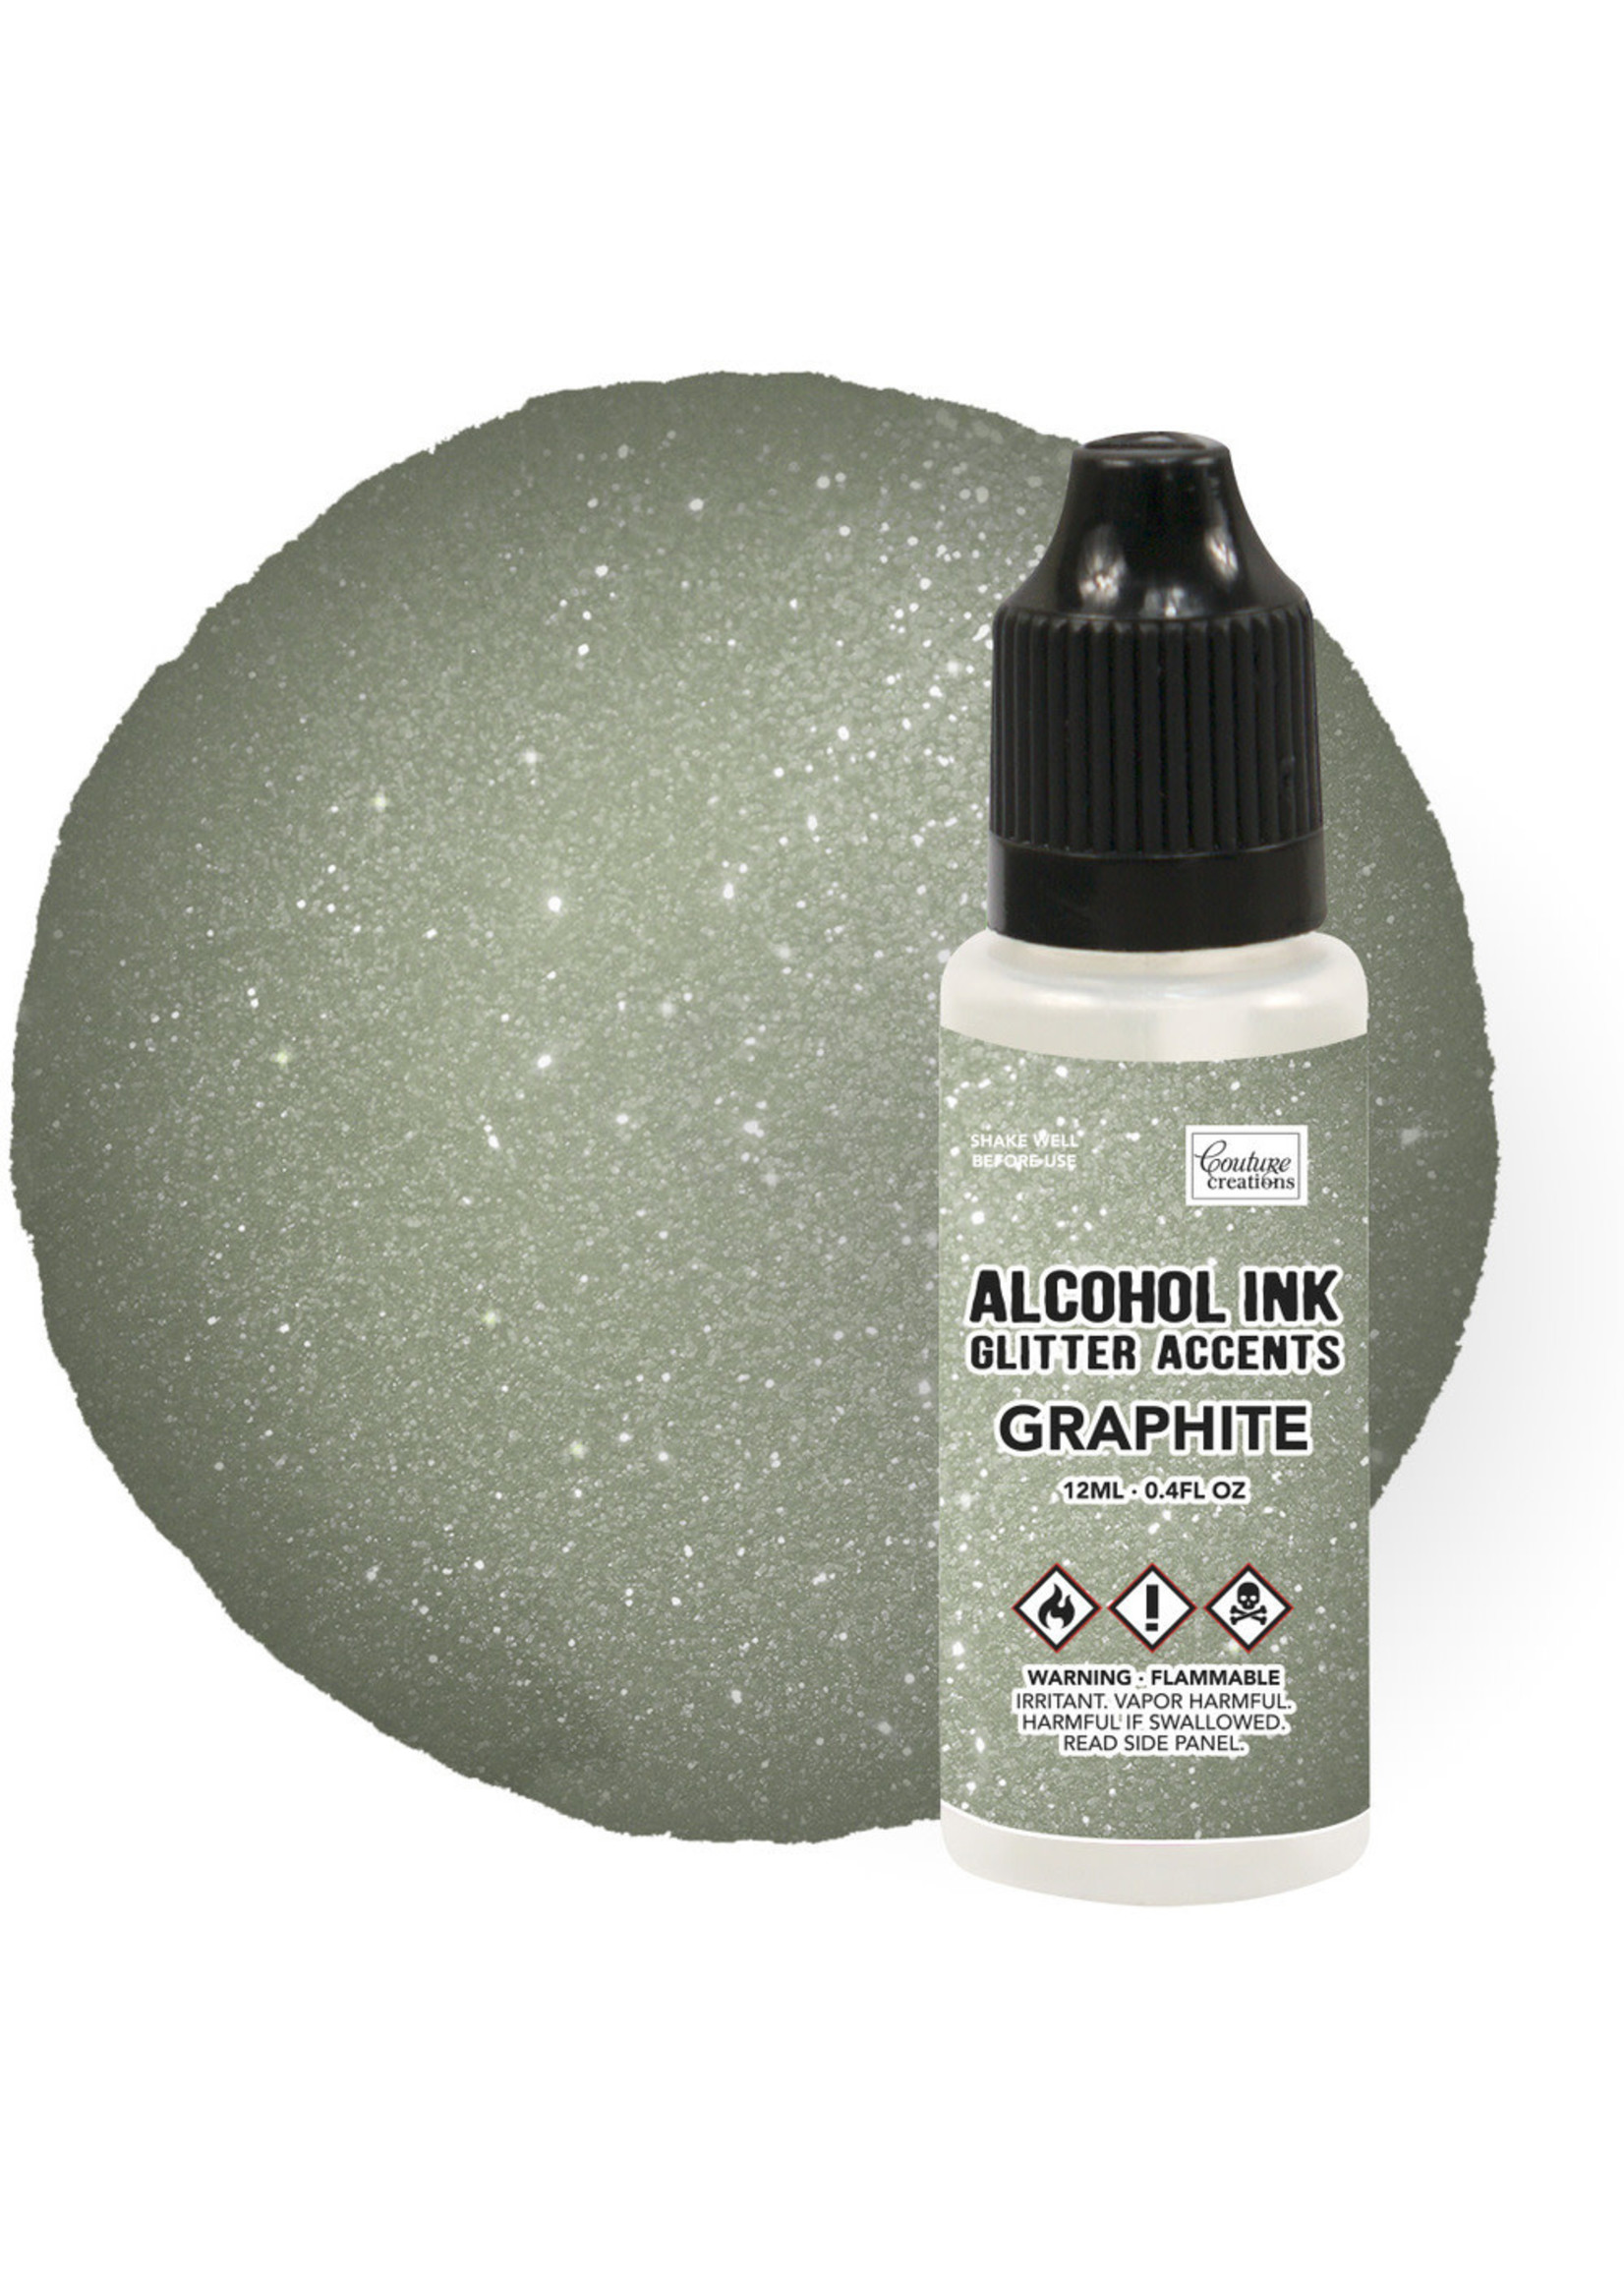 Couture Creations Couture Creations Alcohol Ink Glitter Accents, Graphite